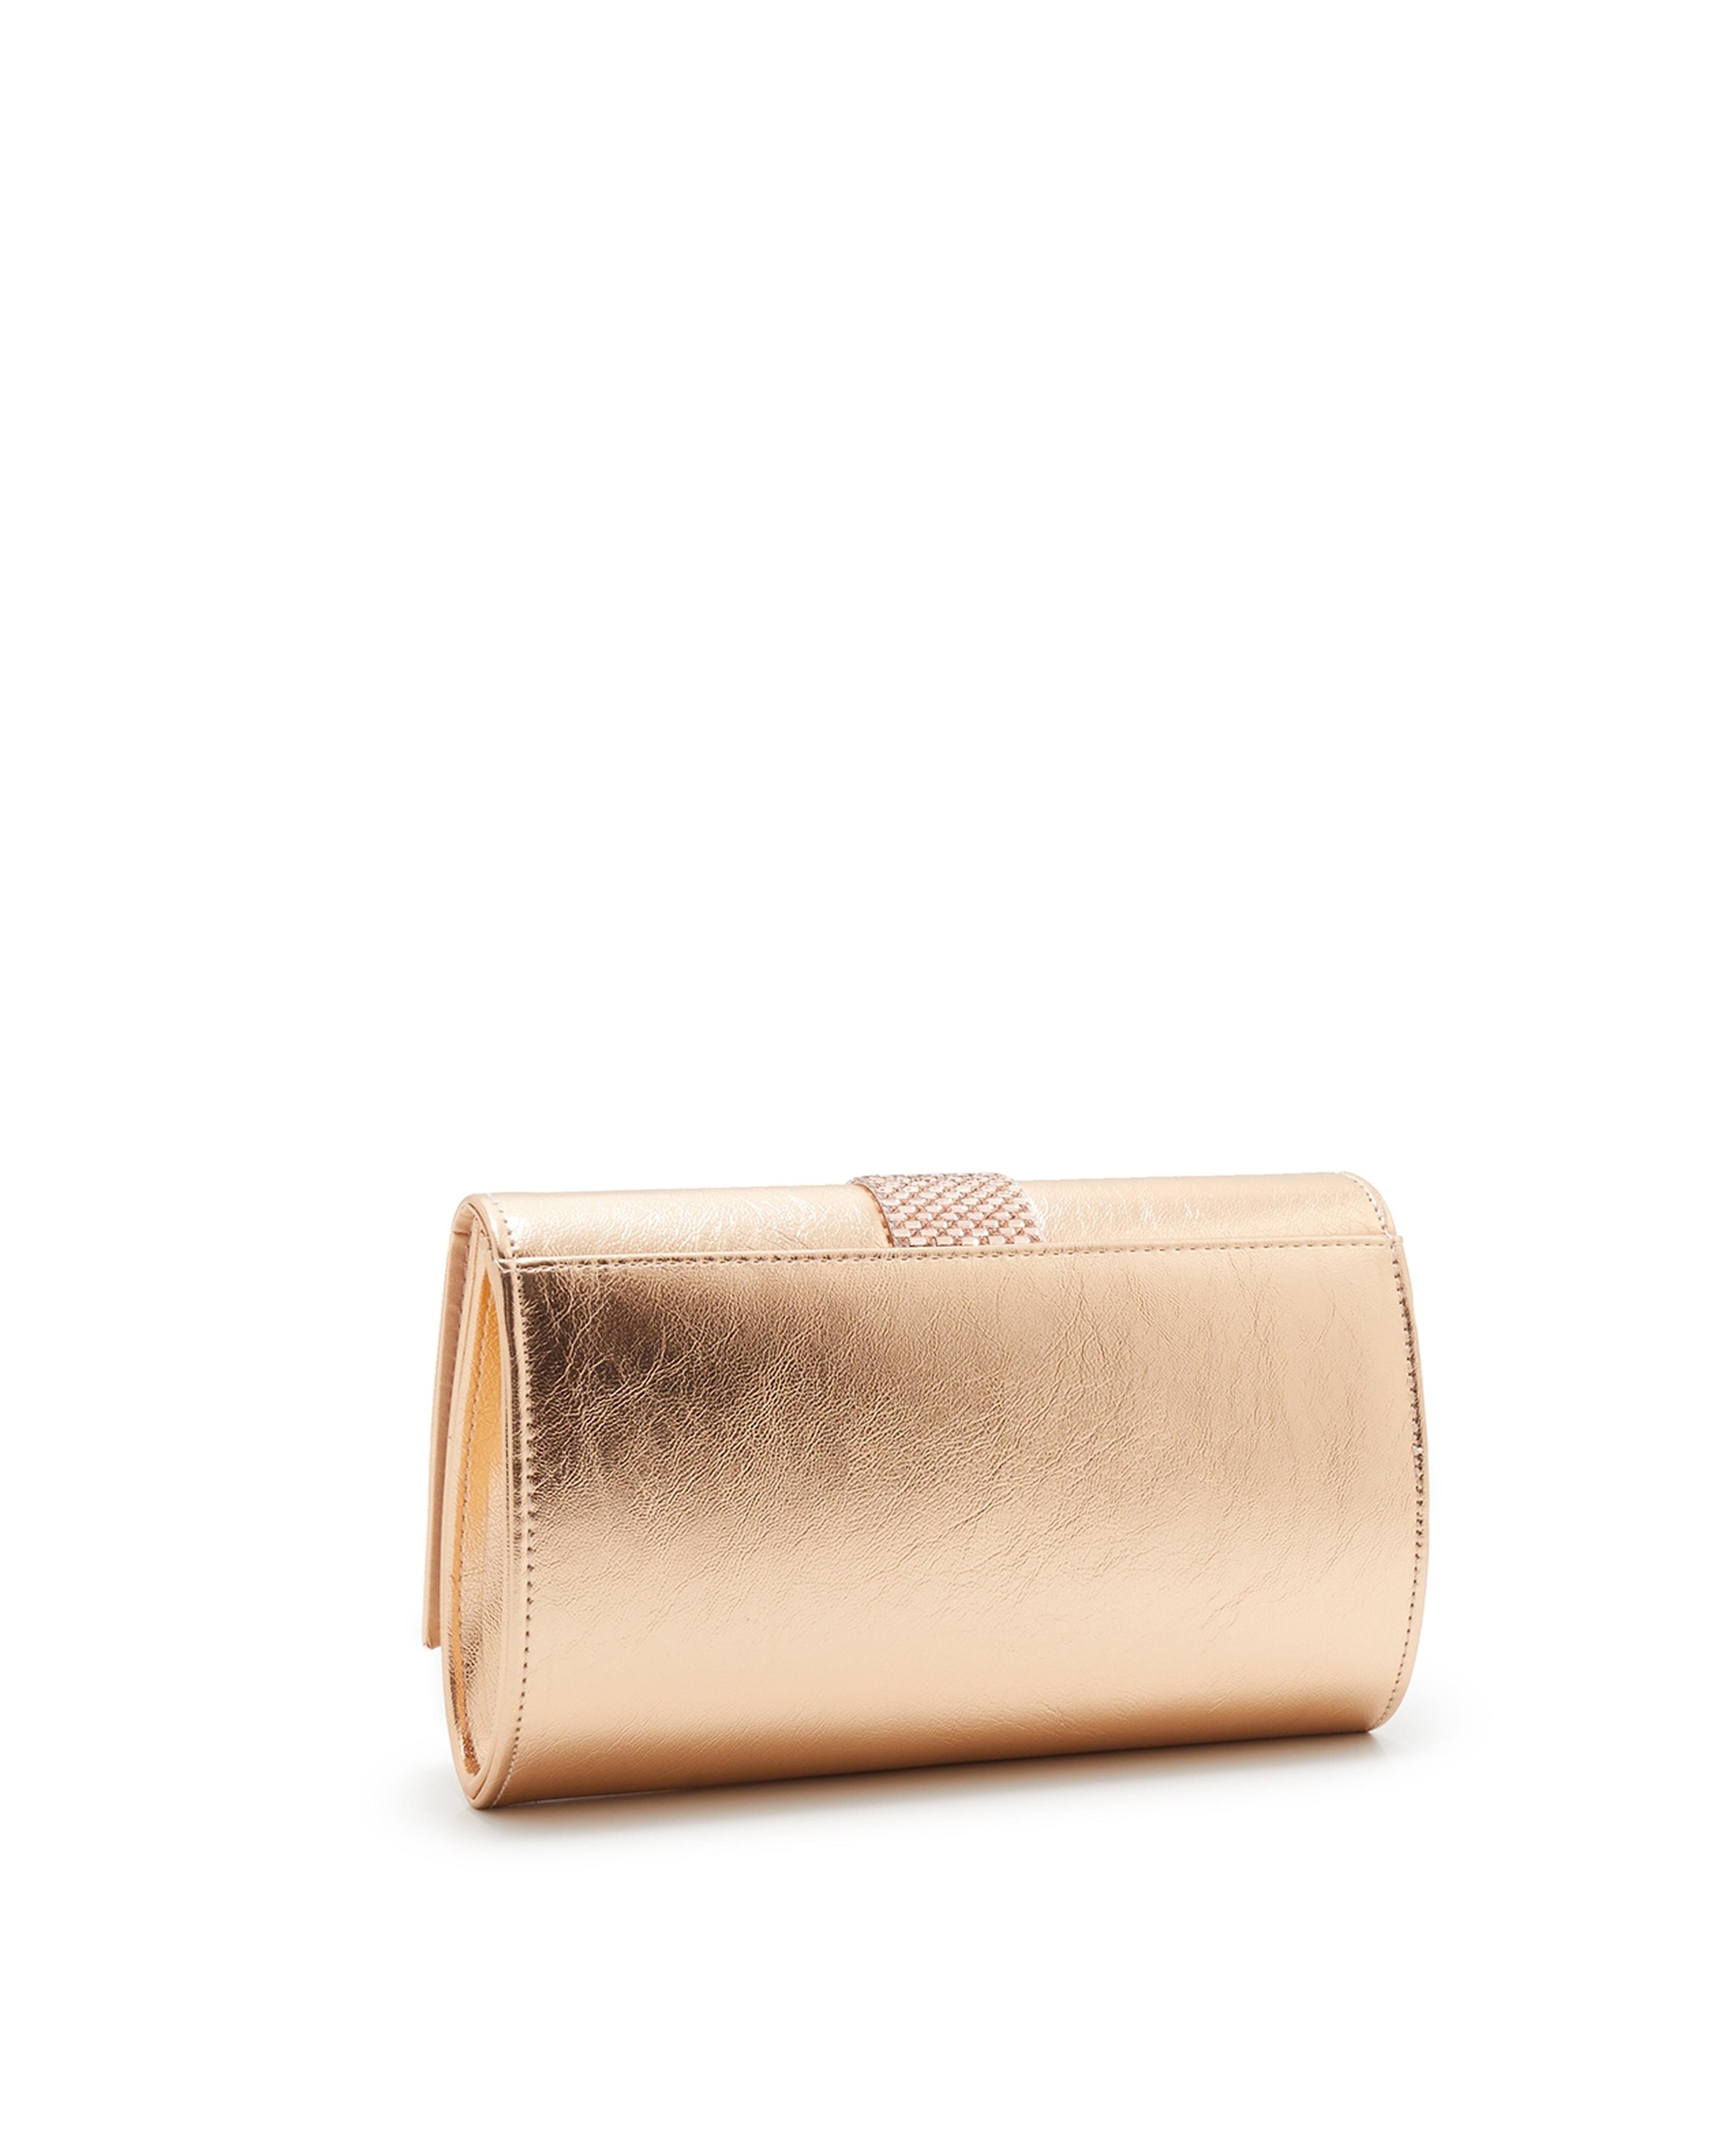 Textured Clutch with Sling